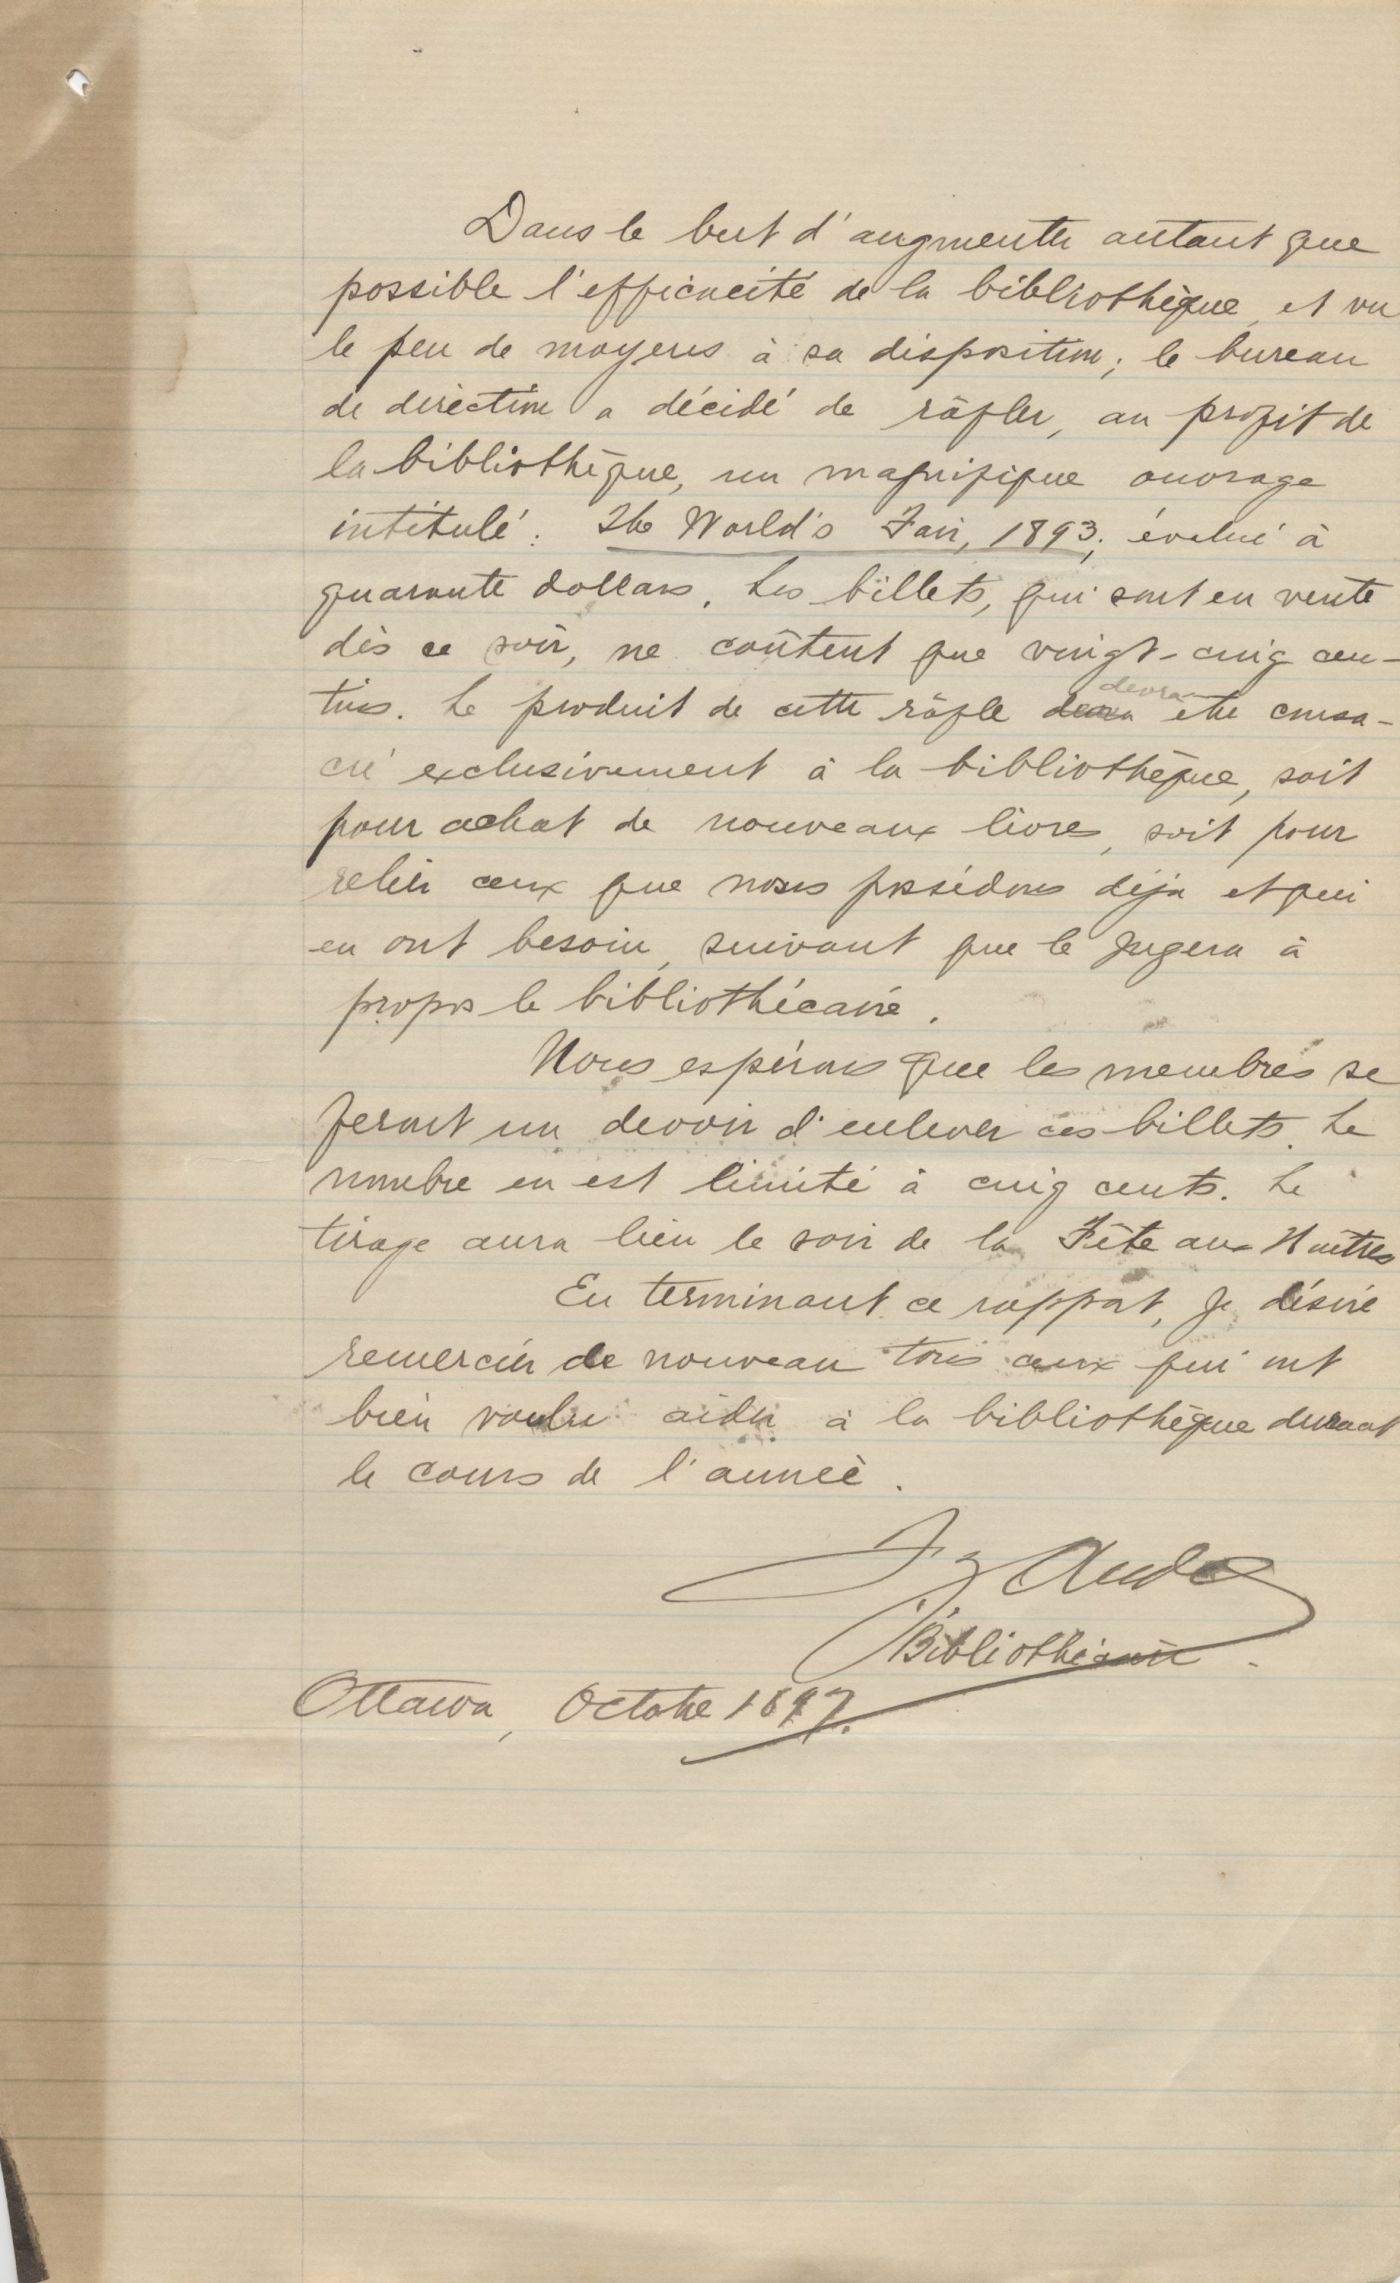 Report written by hand in French, with corrections and additions in pencil. It includes a list of donors and a list of newspapers and magazines that are part of the collection. It is signed by the librarian in Ottawa, in October 1897.